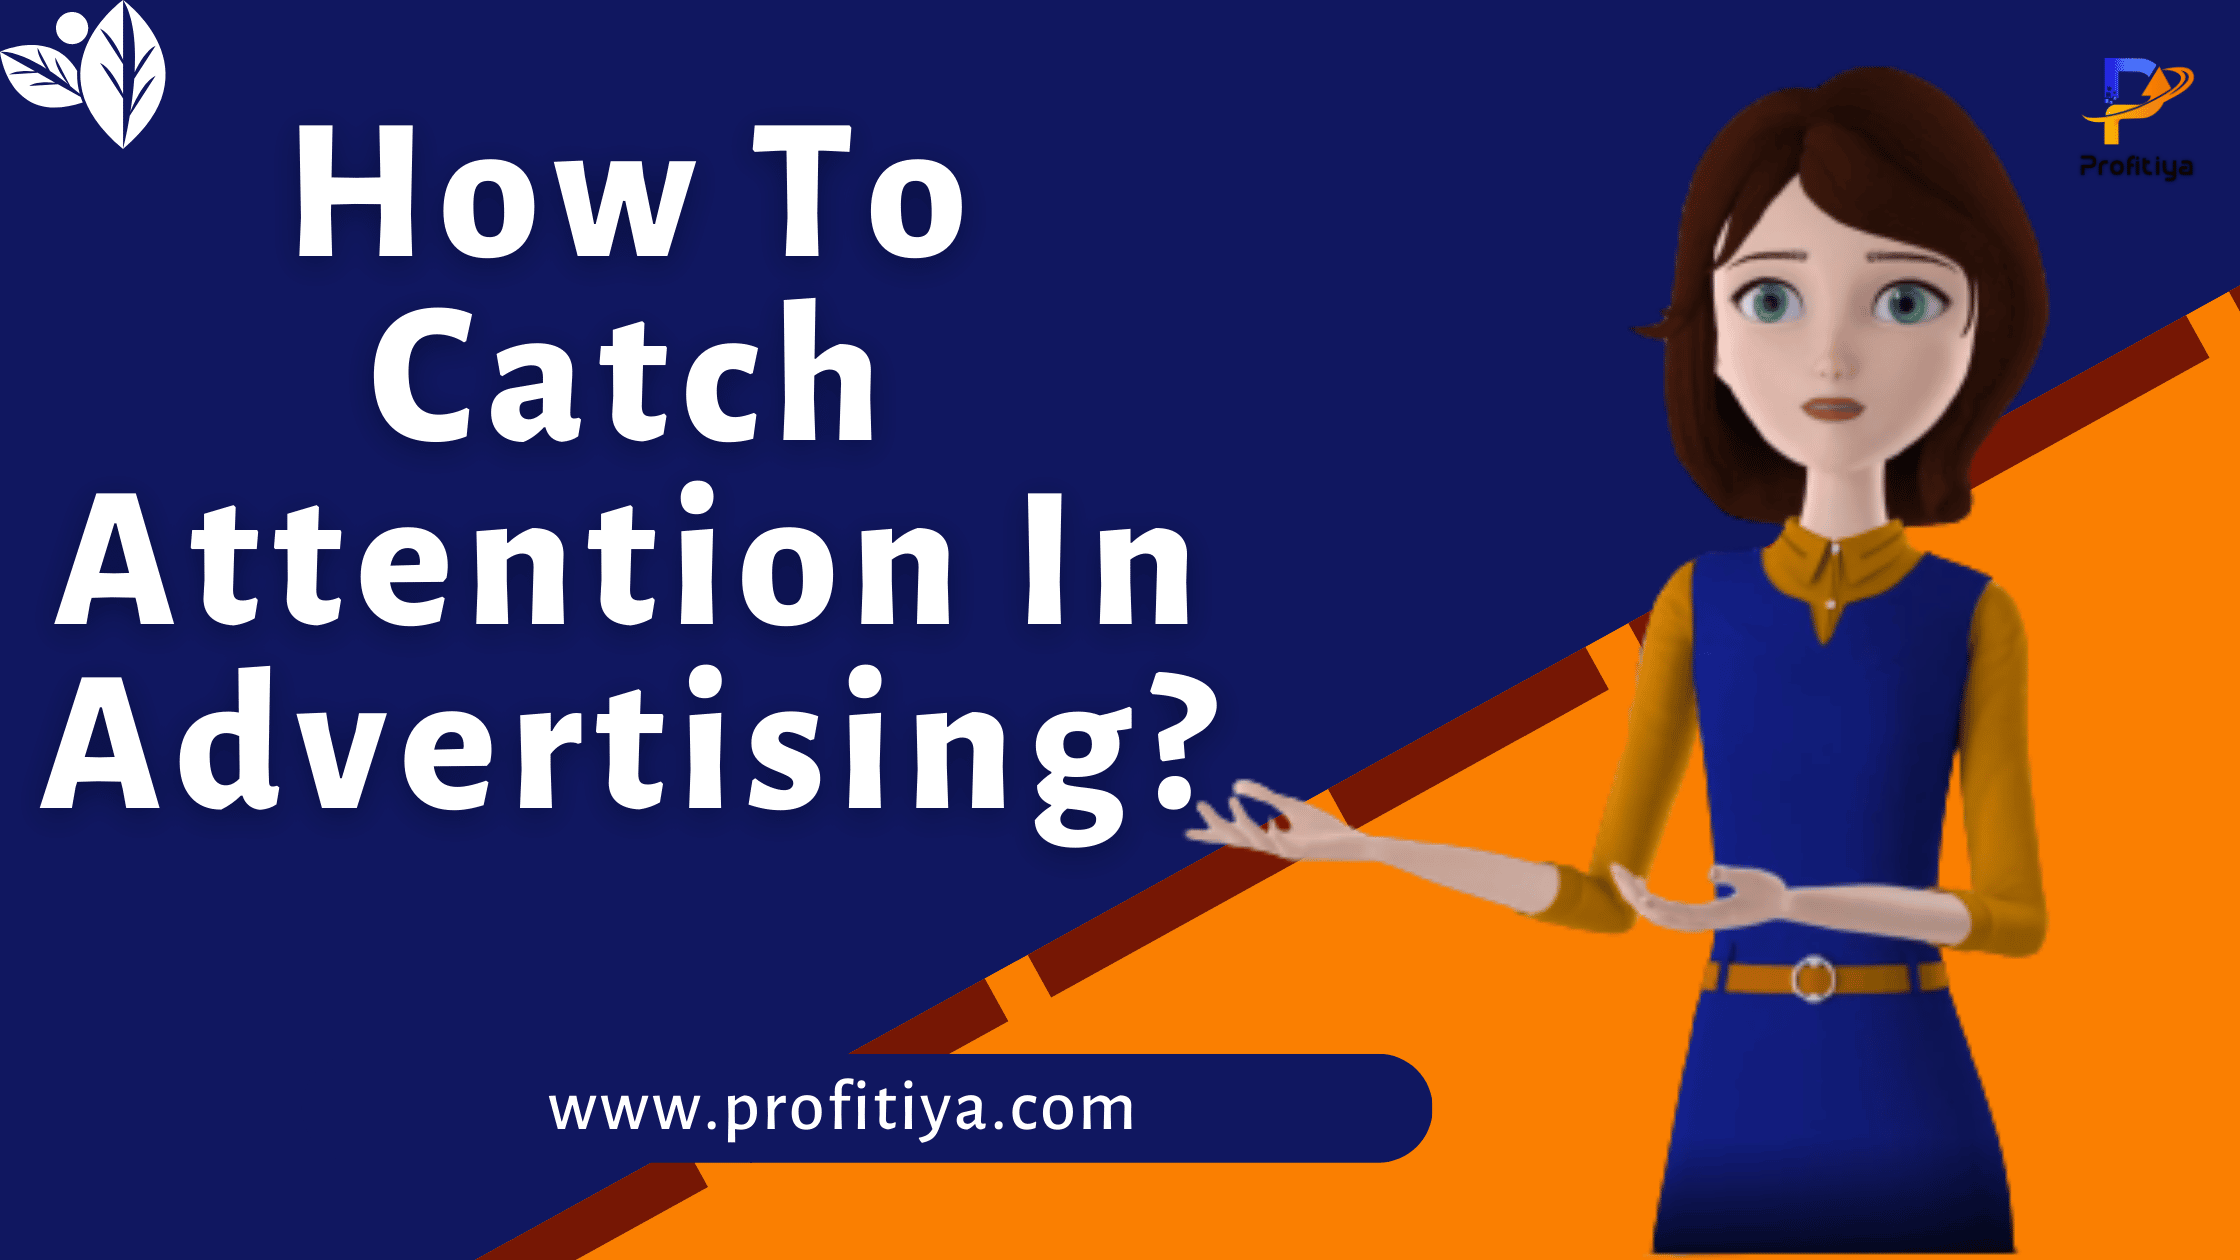 How To Catch Attention In Advertising